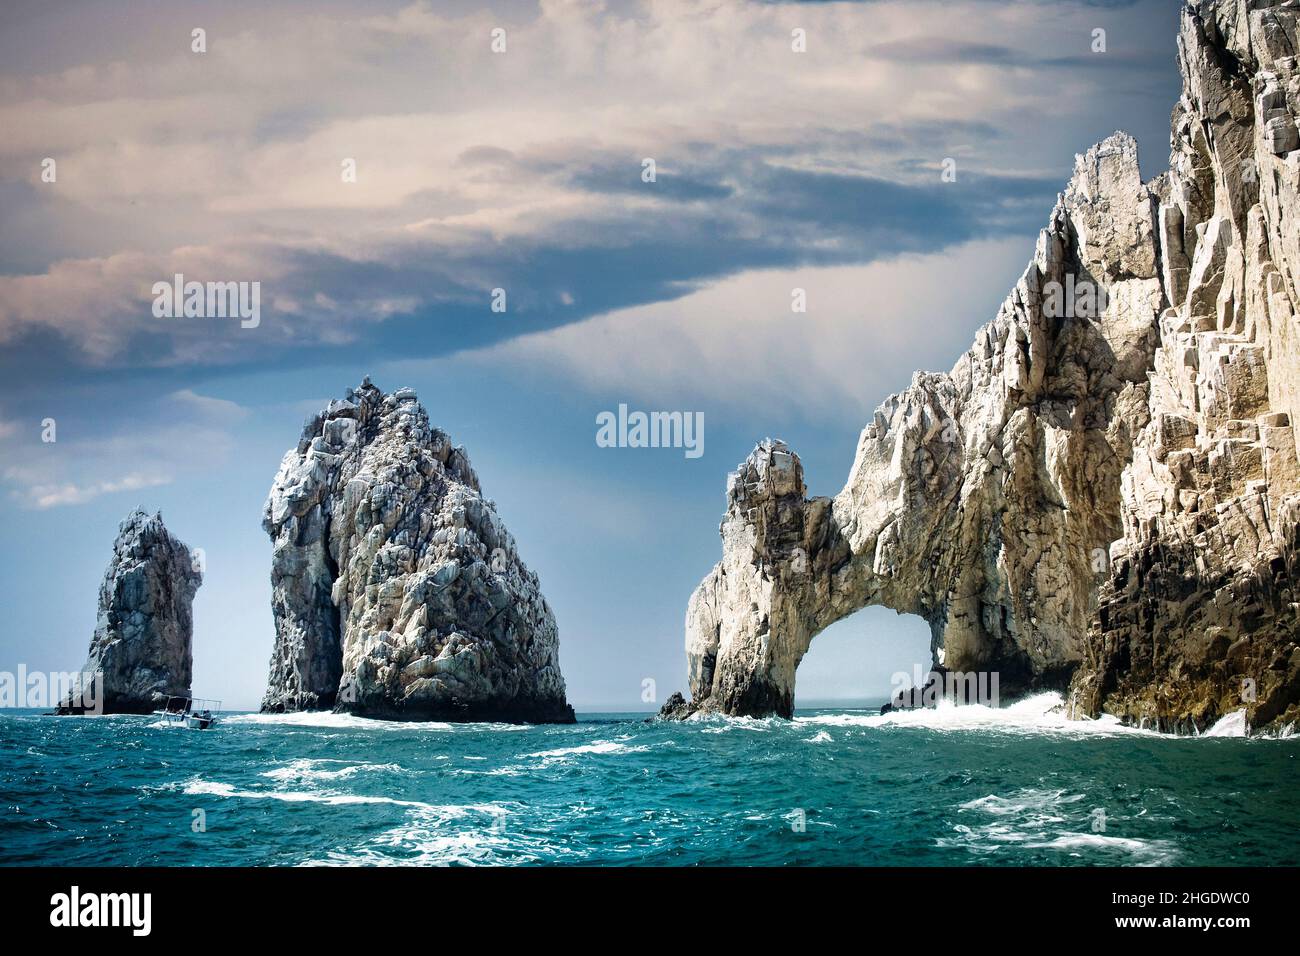 The Arch at Land's End extends into the Pacific Ocean at Cabo San Lucas, Mexico. Stock Photo